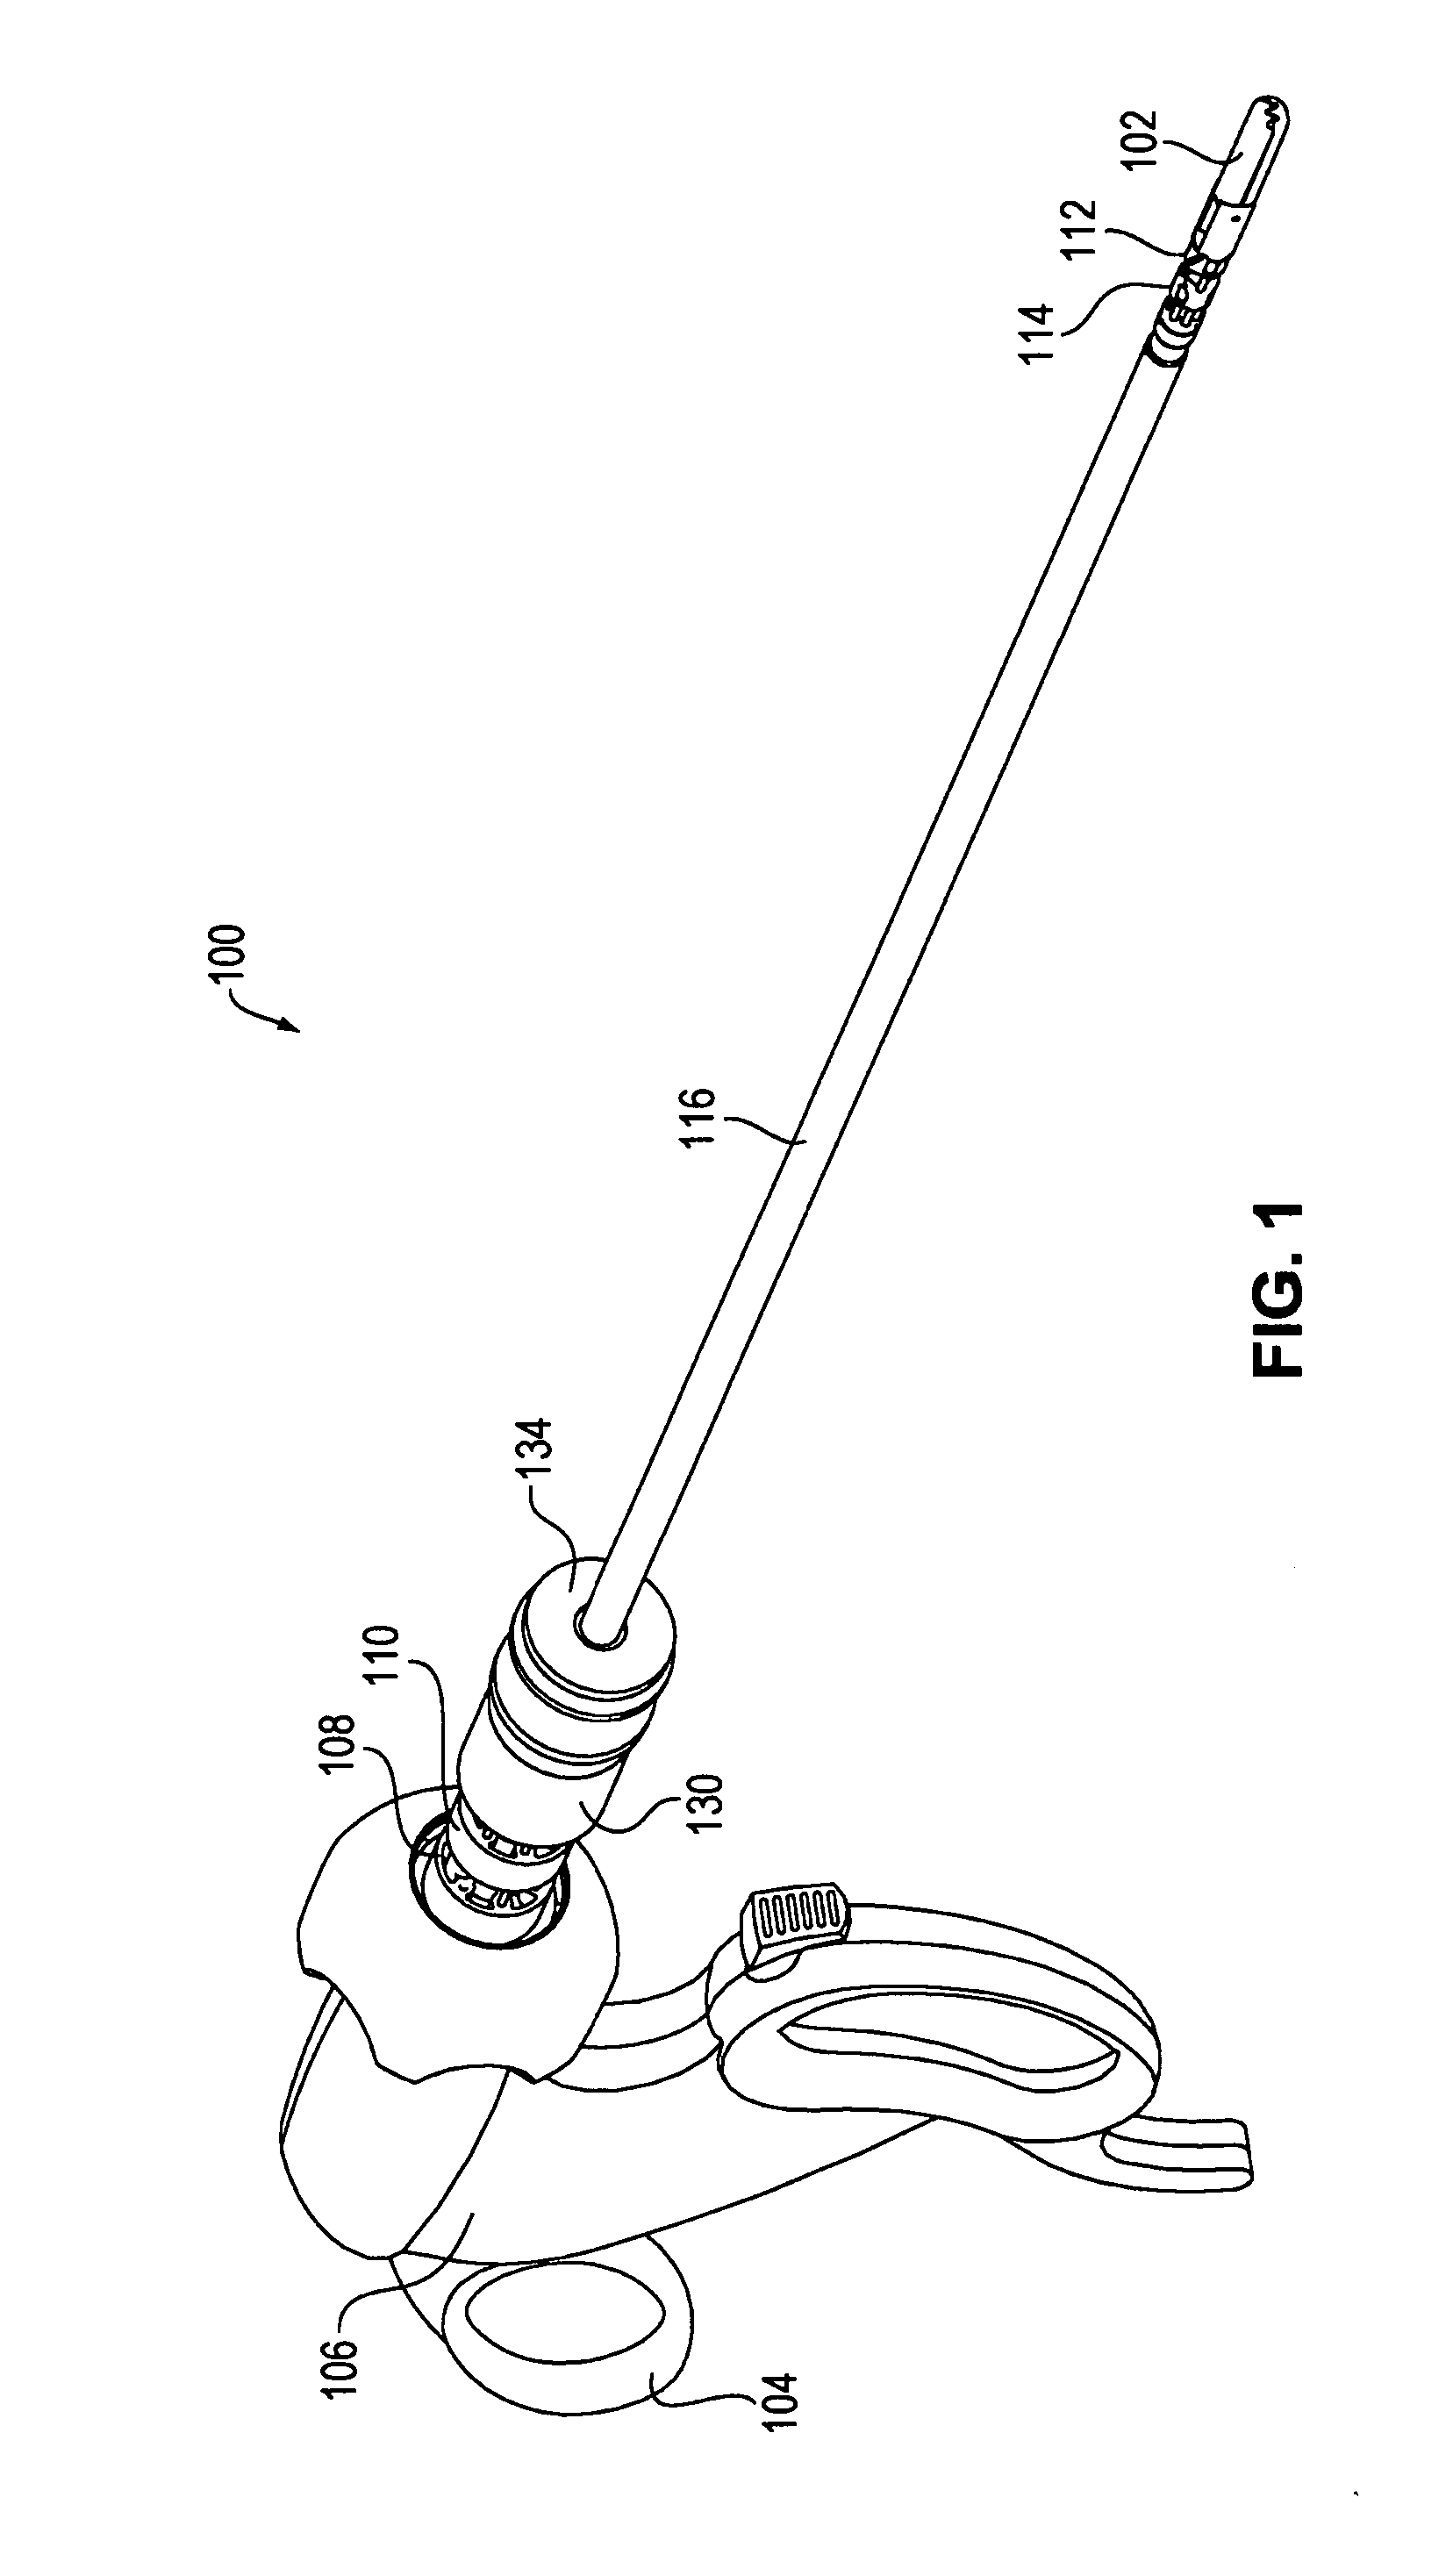 Tool with articulation lock